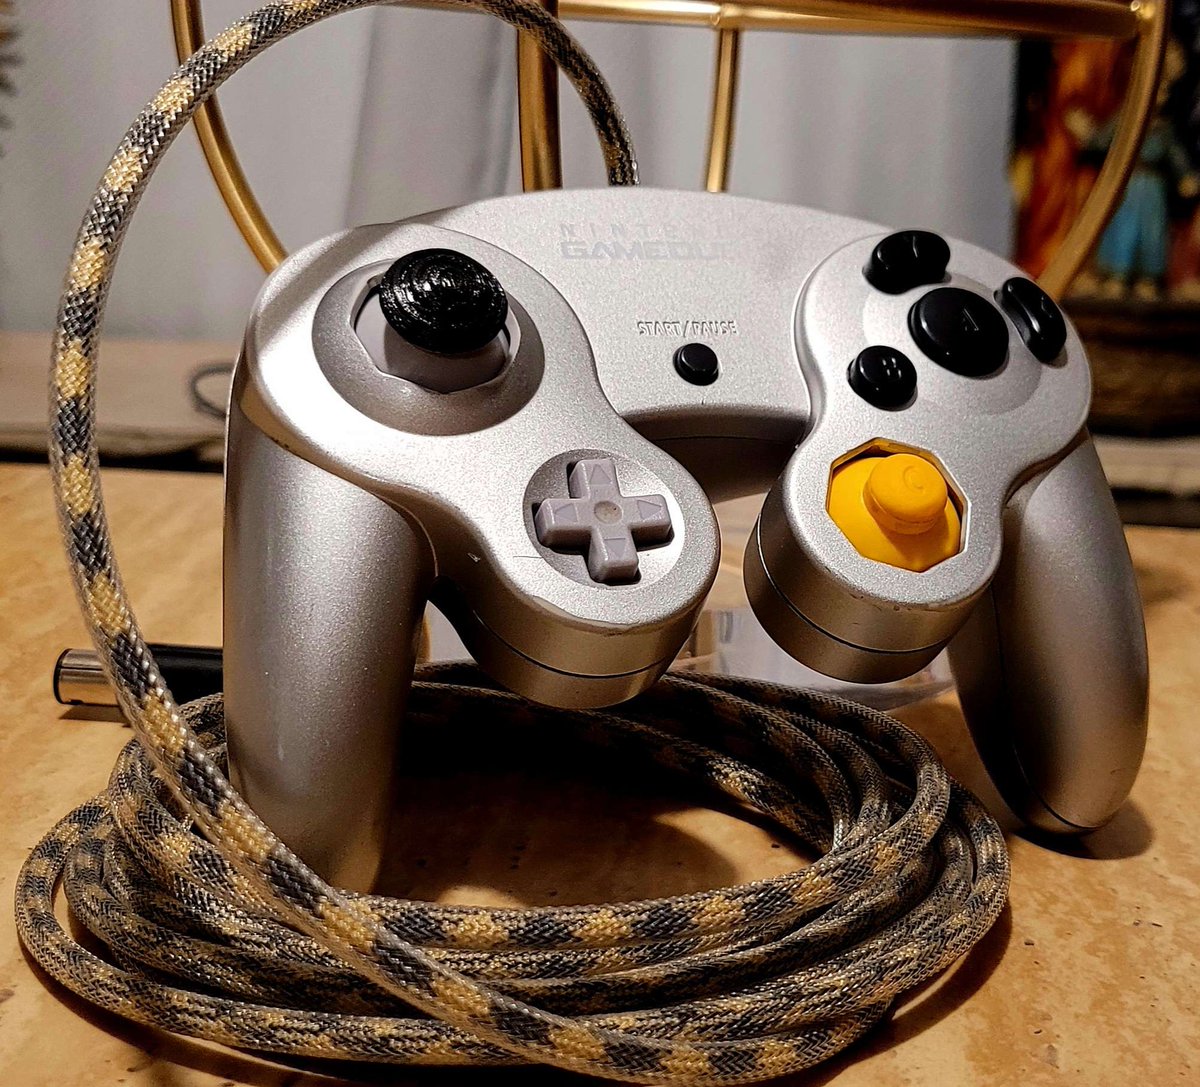 Controller Giveaway for everyone that enters Smash@Epoch 8 Today. Ult Only Controller
- Synnett Cap
- Mechanical Keyboard Triggers
- Adjustable Anti-Snapback Module
- Paracord with Techflex Cable
- Clicky Face Button Membrane
- Stabilized Face Buttons
- Mouse Switch Z Button